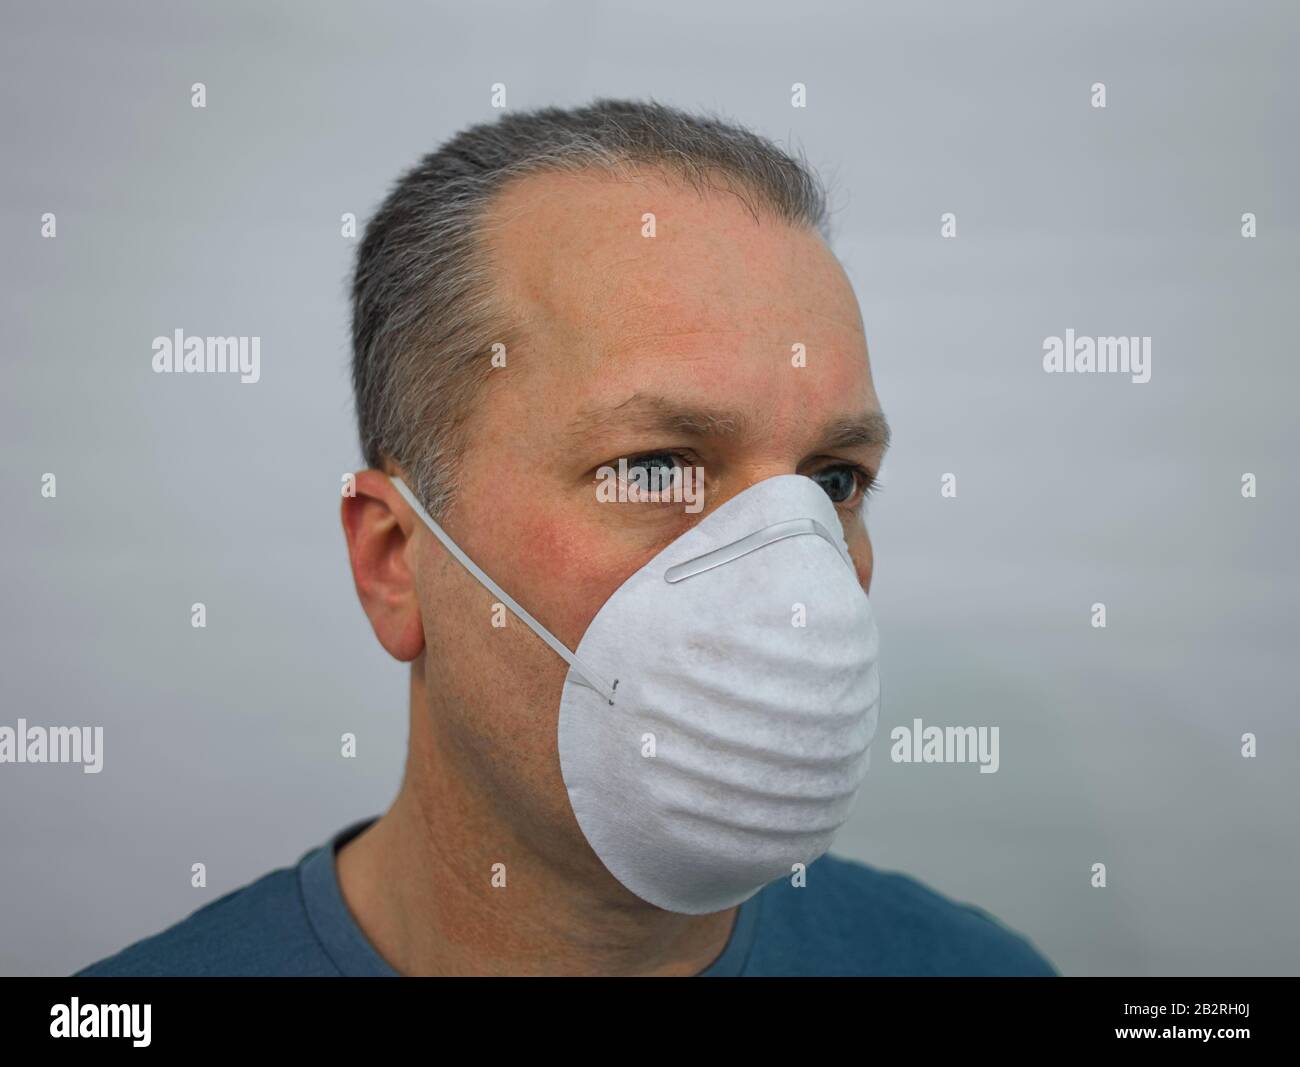 The face of a man wearing a breathing mask Stock Photo